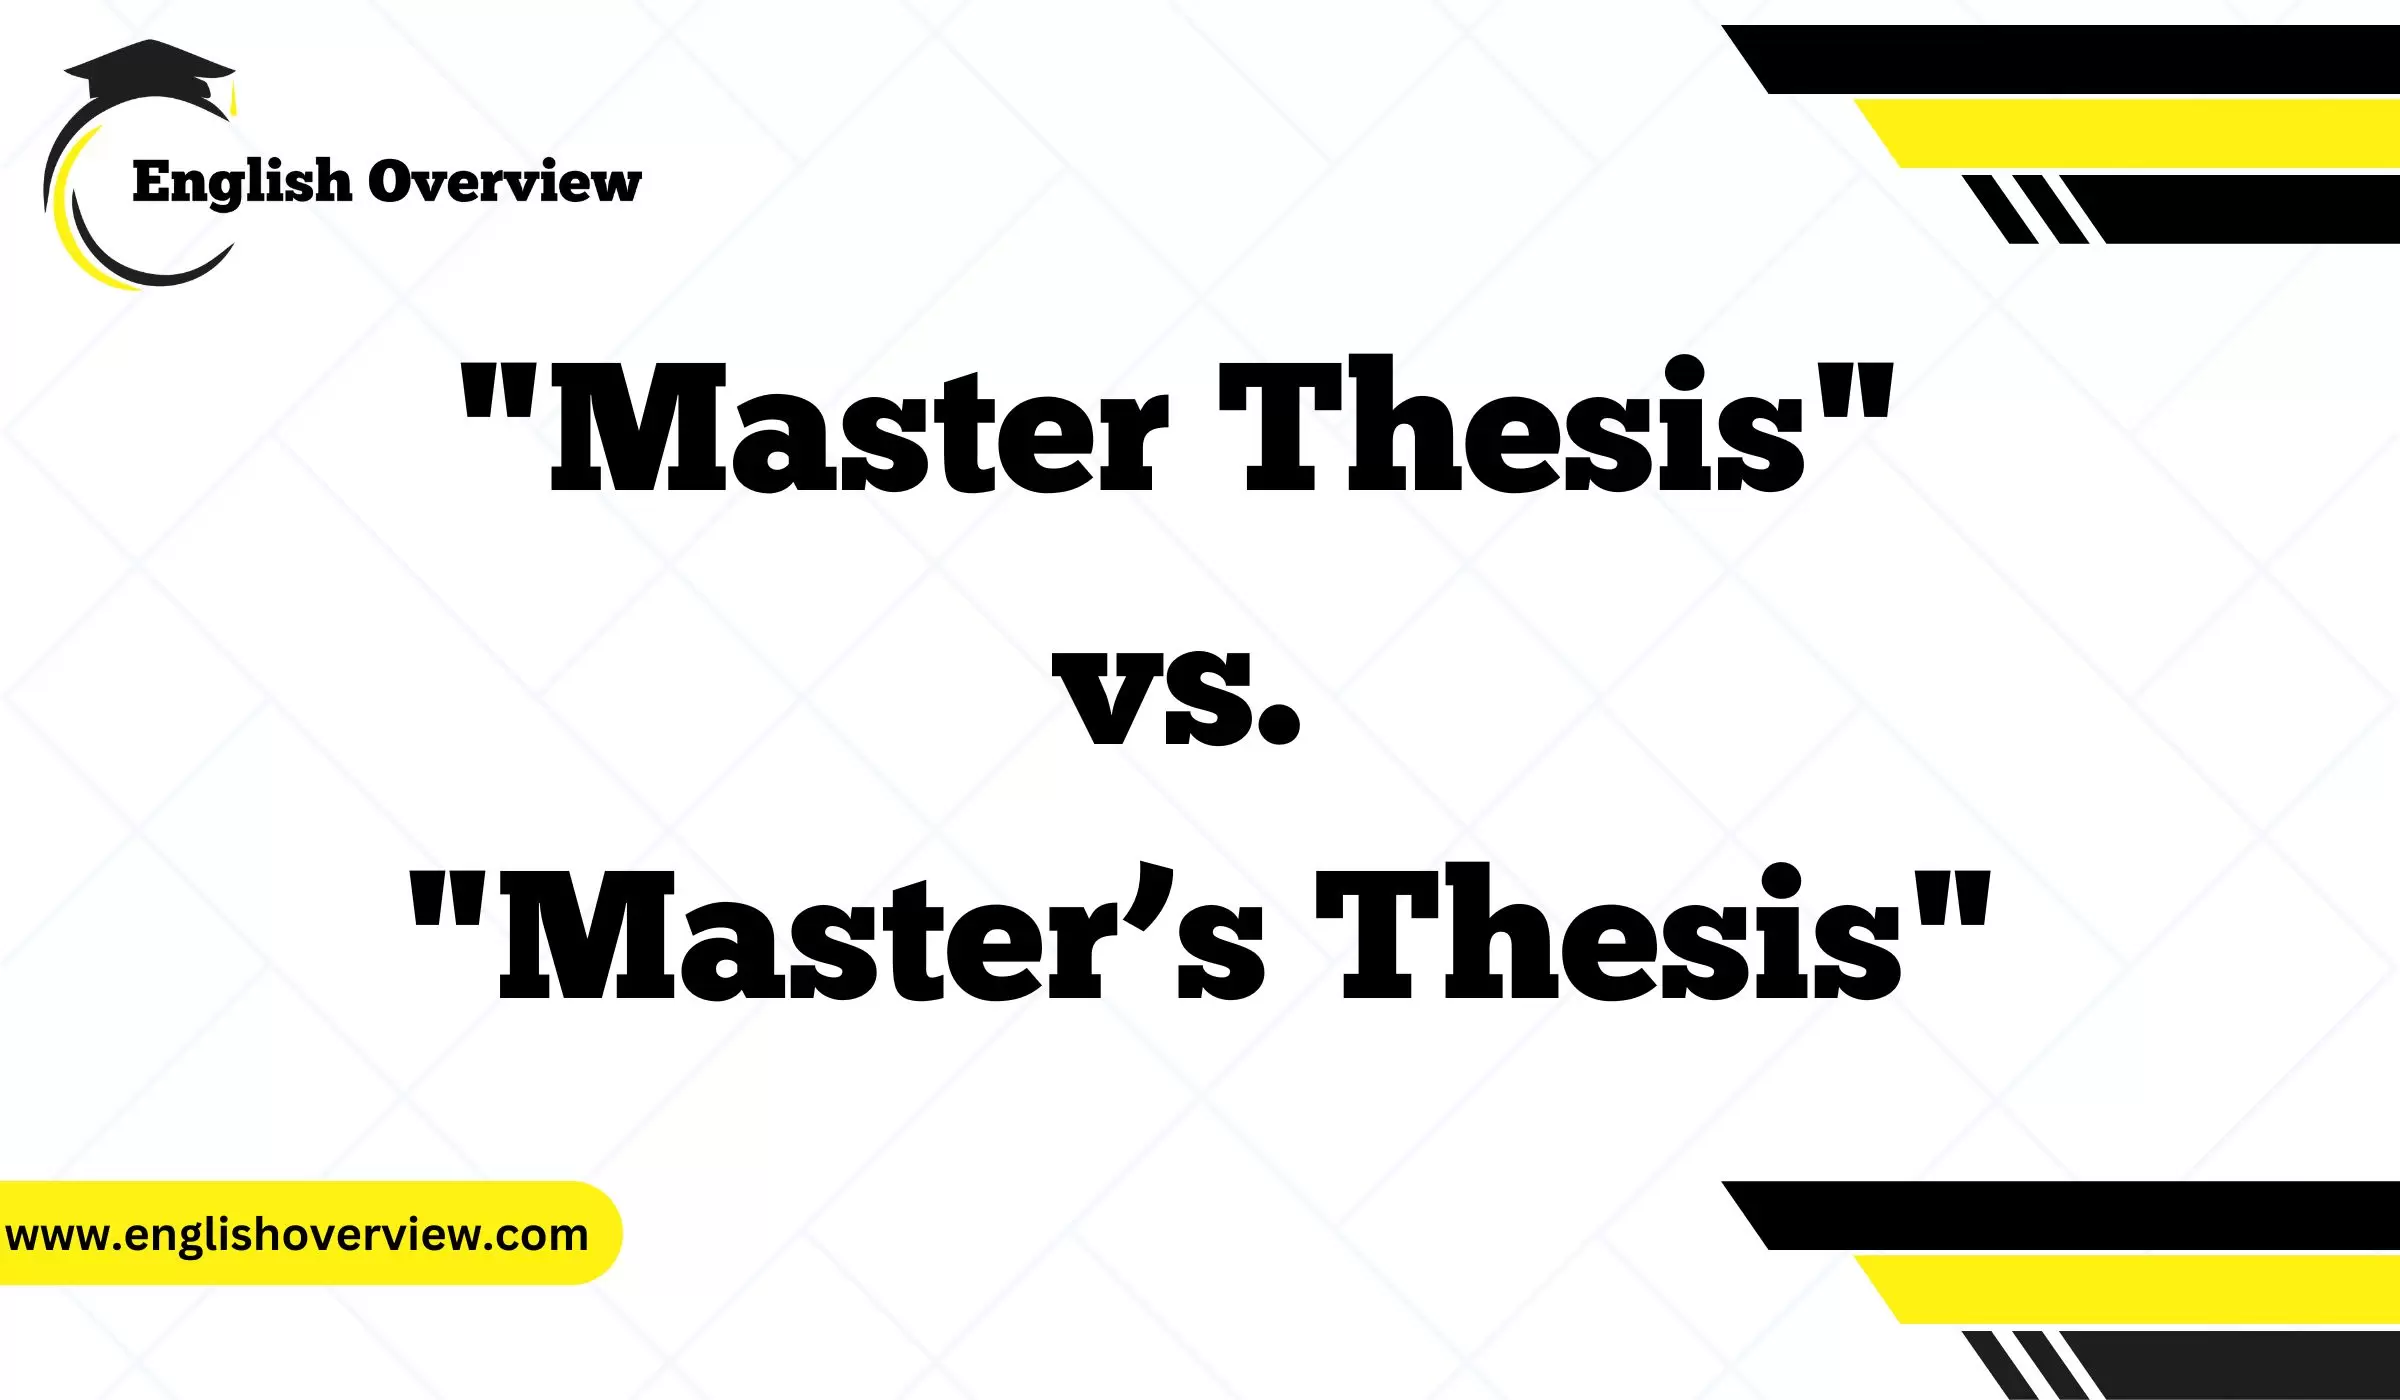 "Master Thesis" vs. "Master’s Thesis"